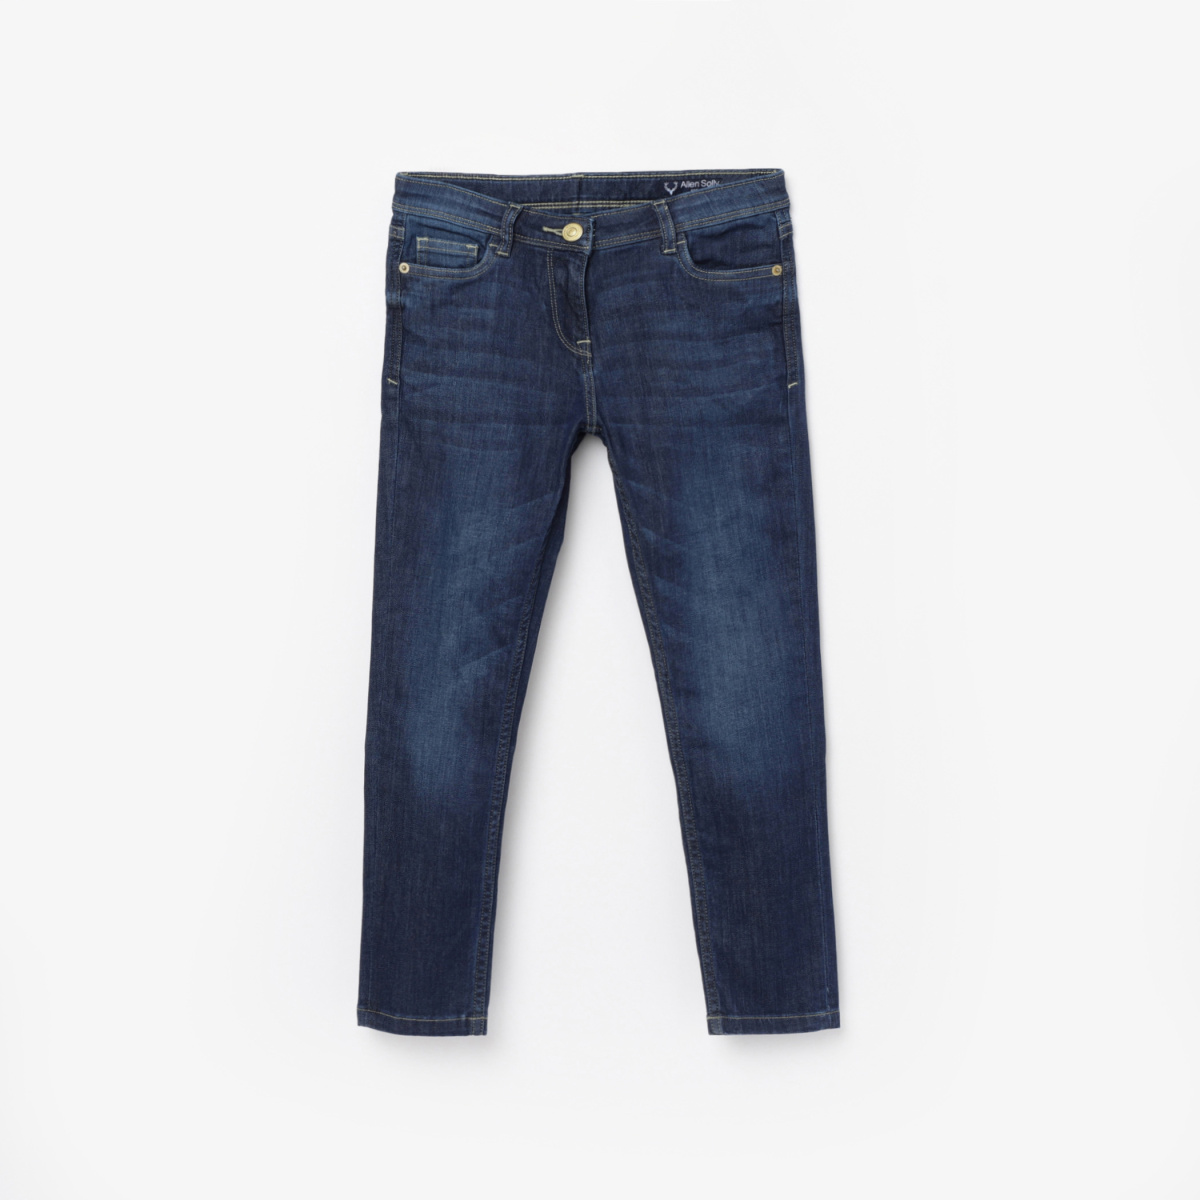 ALLEN SOLLY Boys Stonewashed Regular Fit Jeans